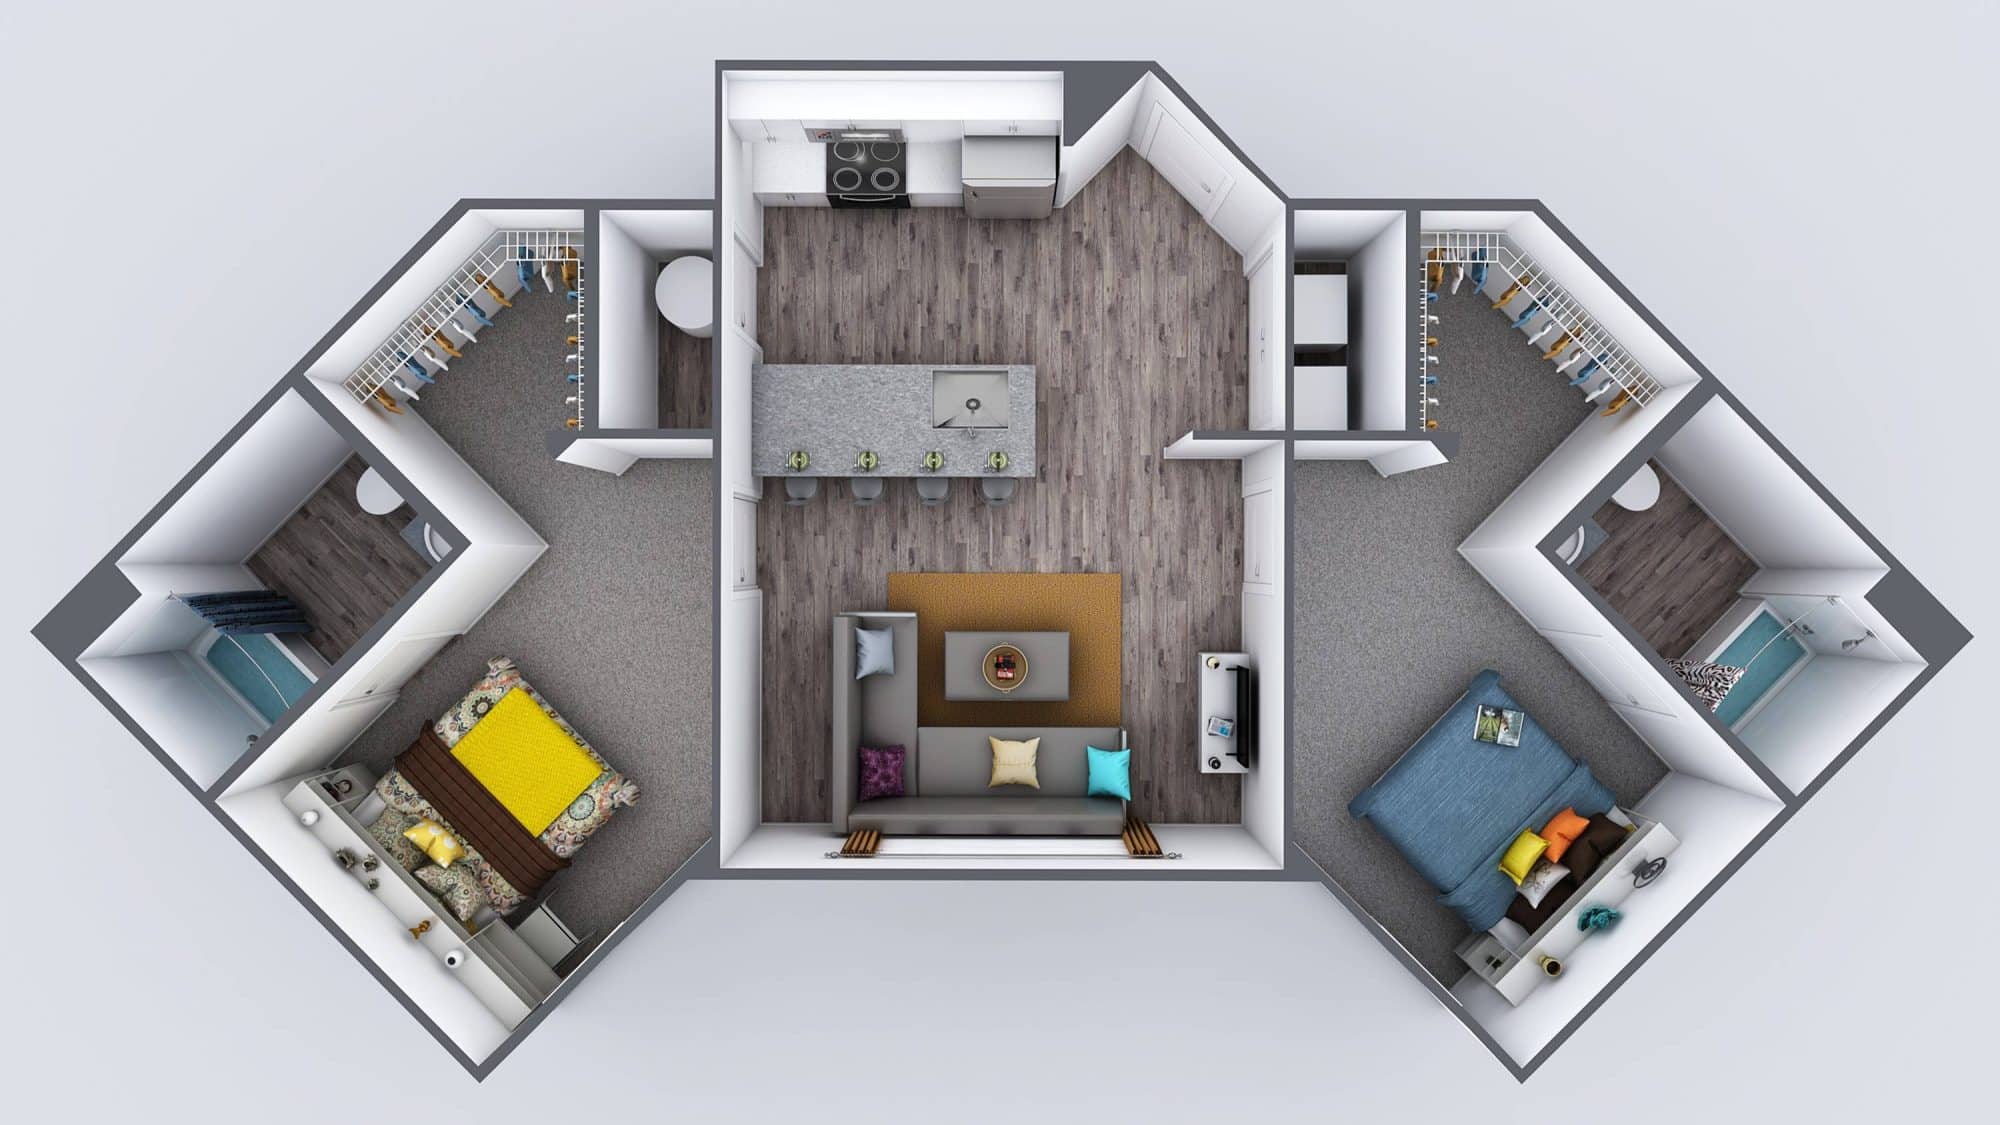 A 3D image of the 2BR/2BA – Deluxe floorplan, a 789 squarefoot, 2 bed / 2 bath unit